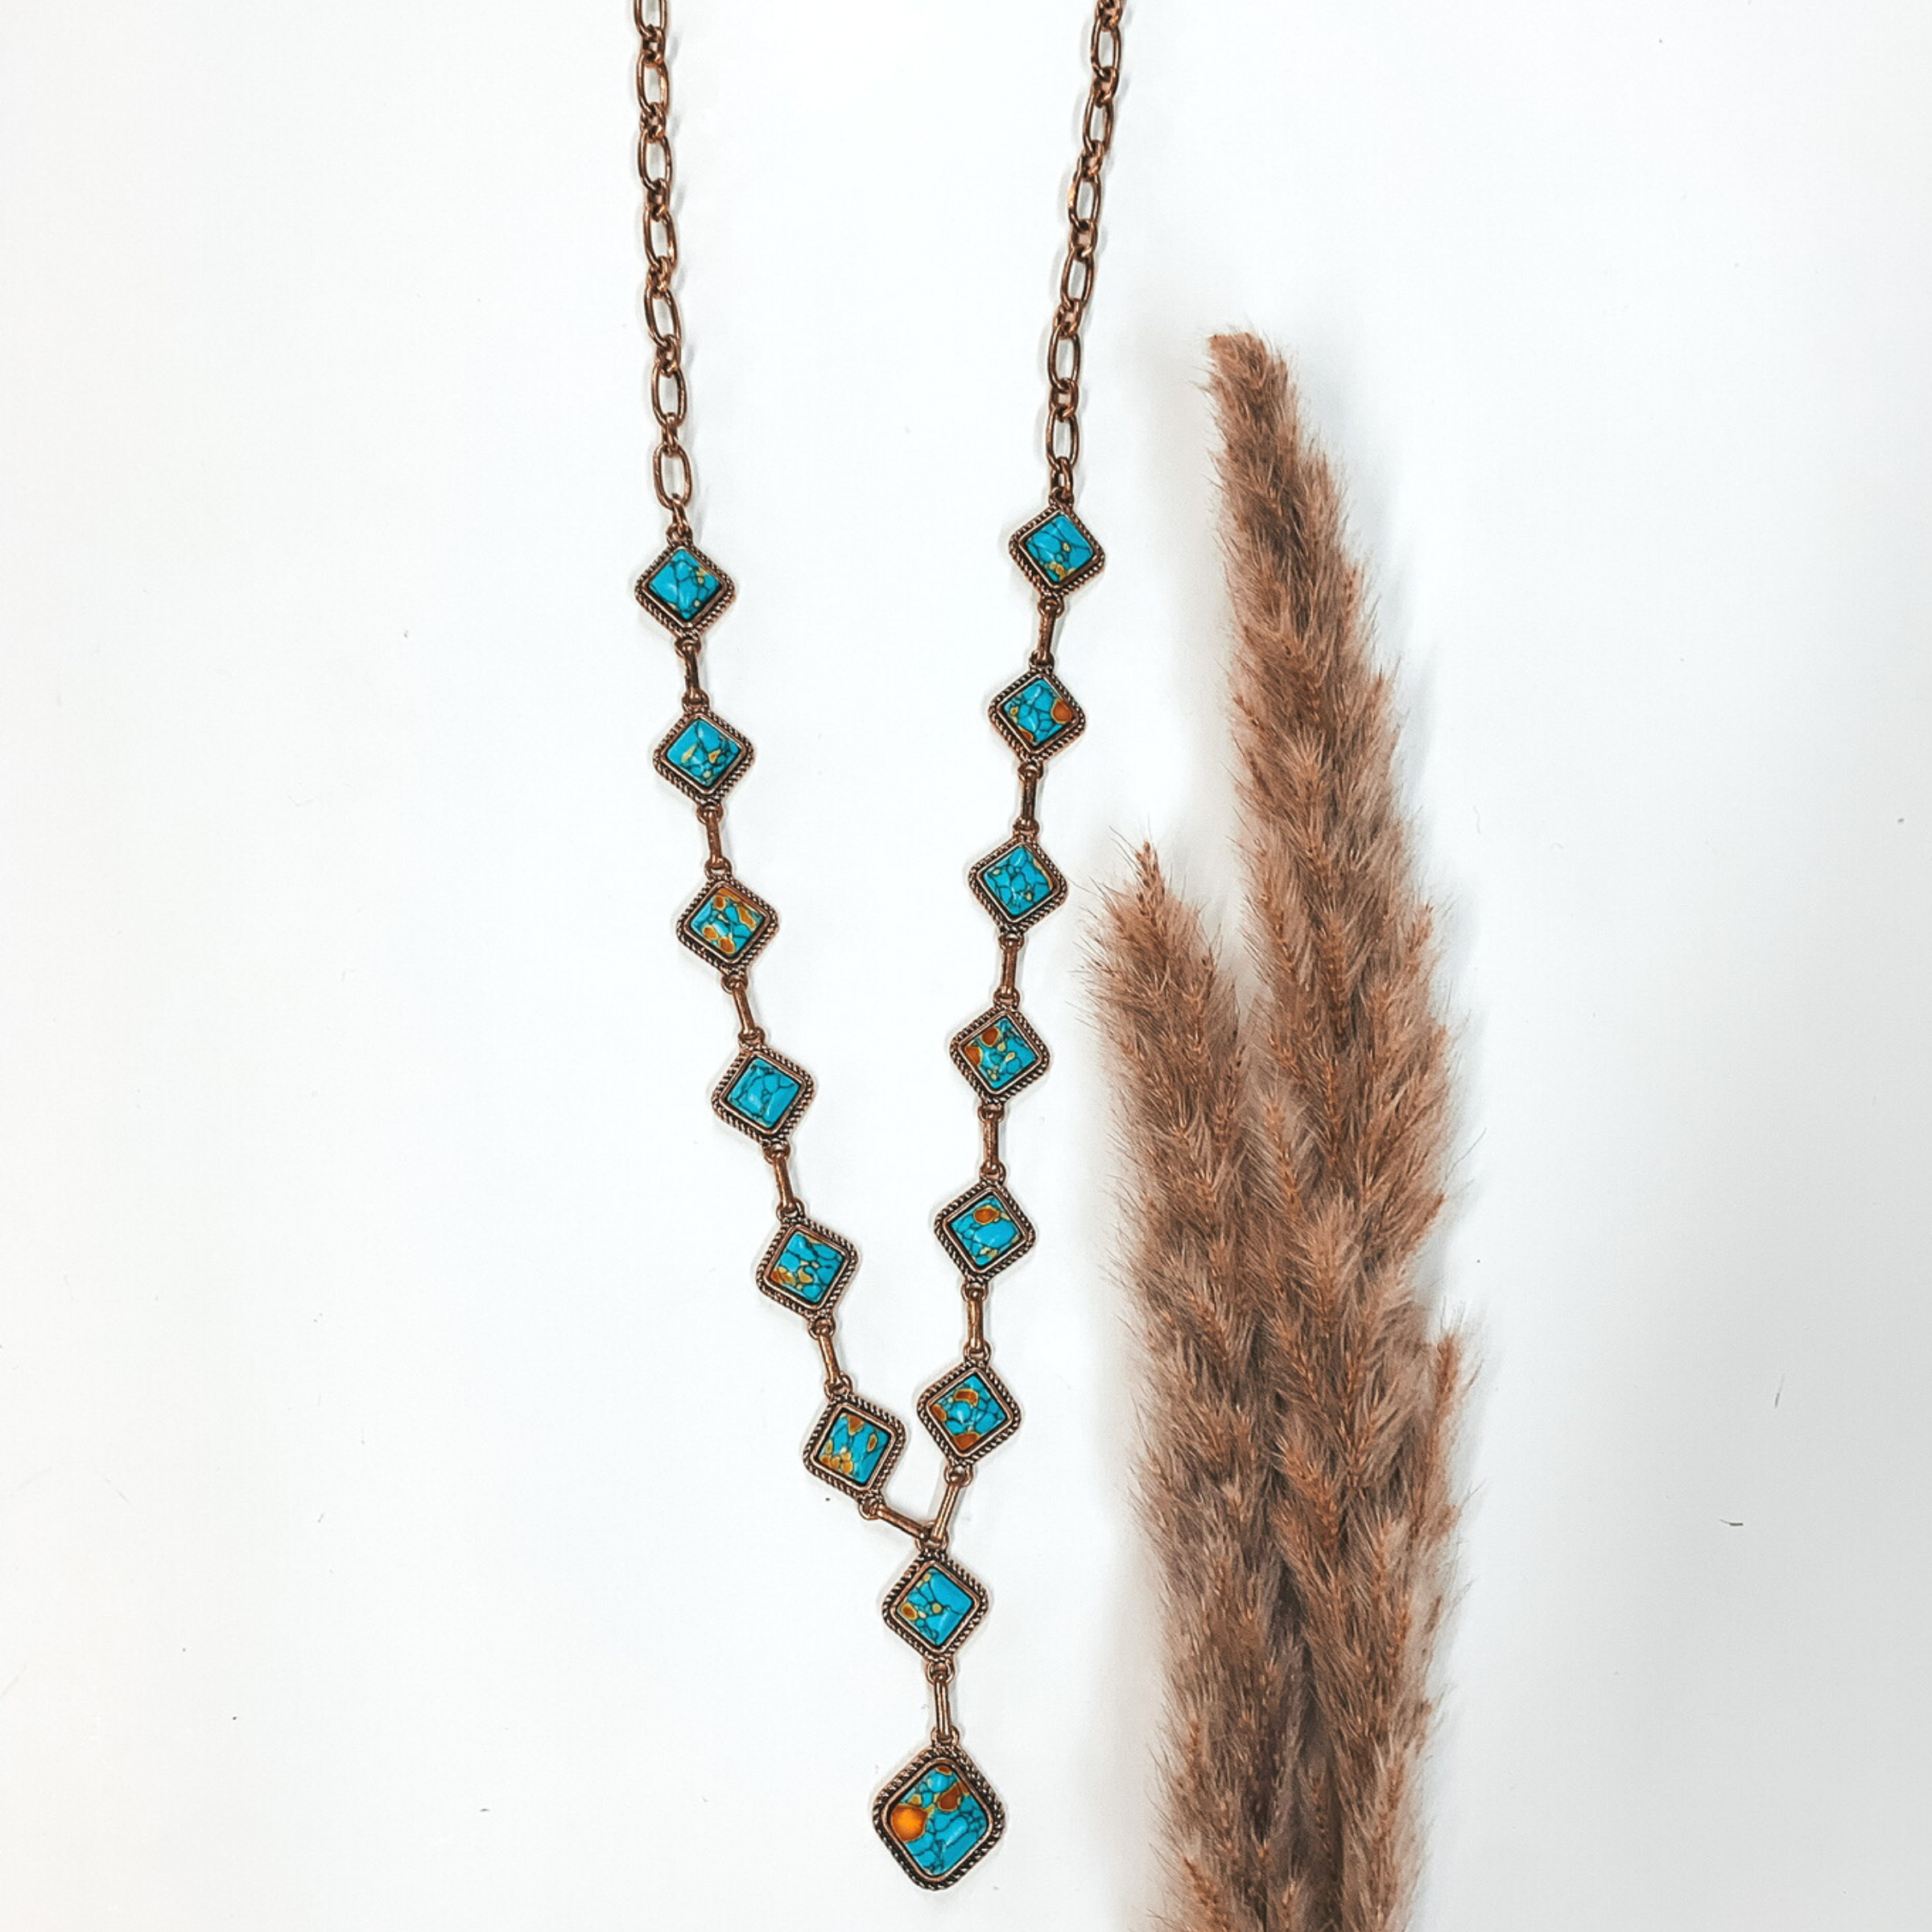 Gold Chain Necklace with Turquoise Square Stones - Giddy Up Glamour Boutique